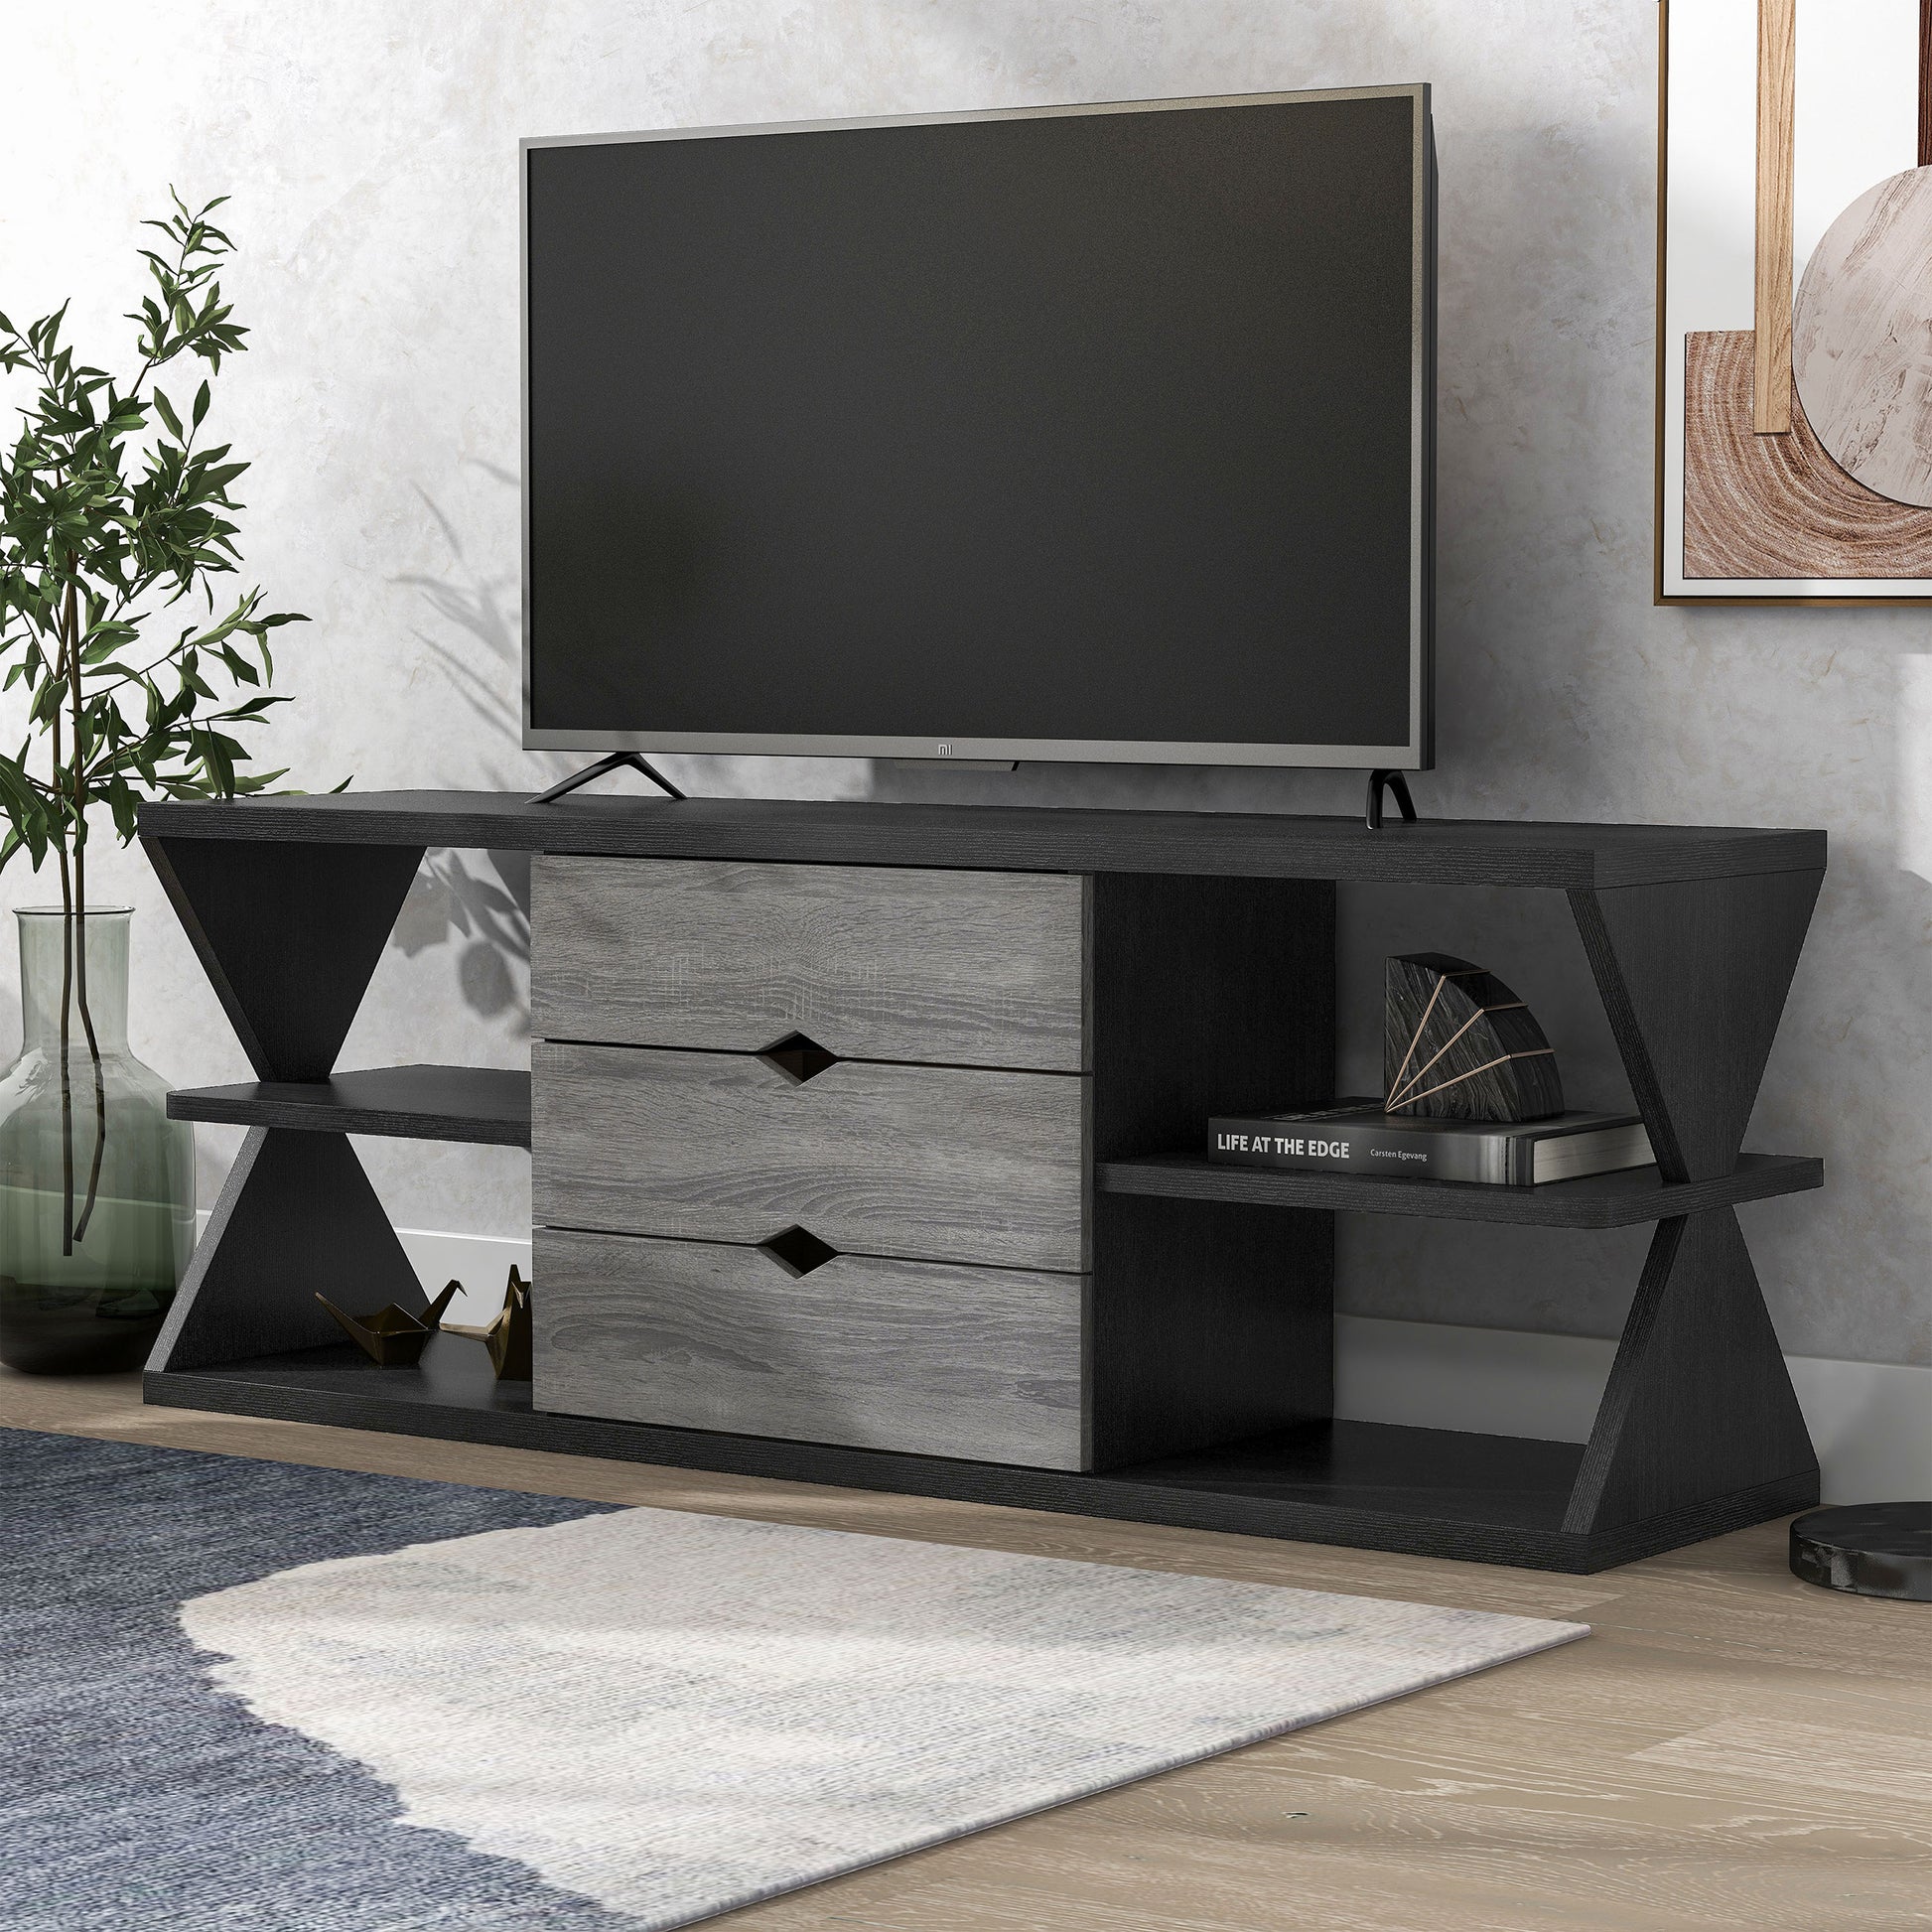 Left angled modern black and distressed gray three-drawer TV stand in a living area with accessories